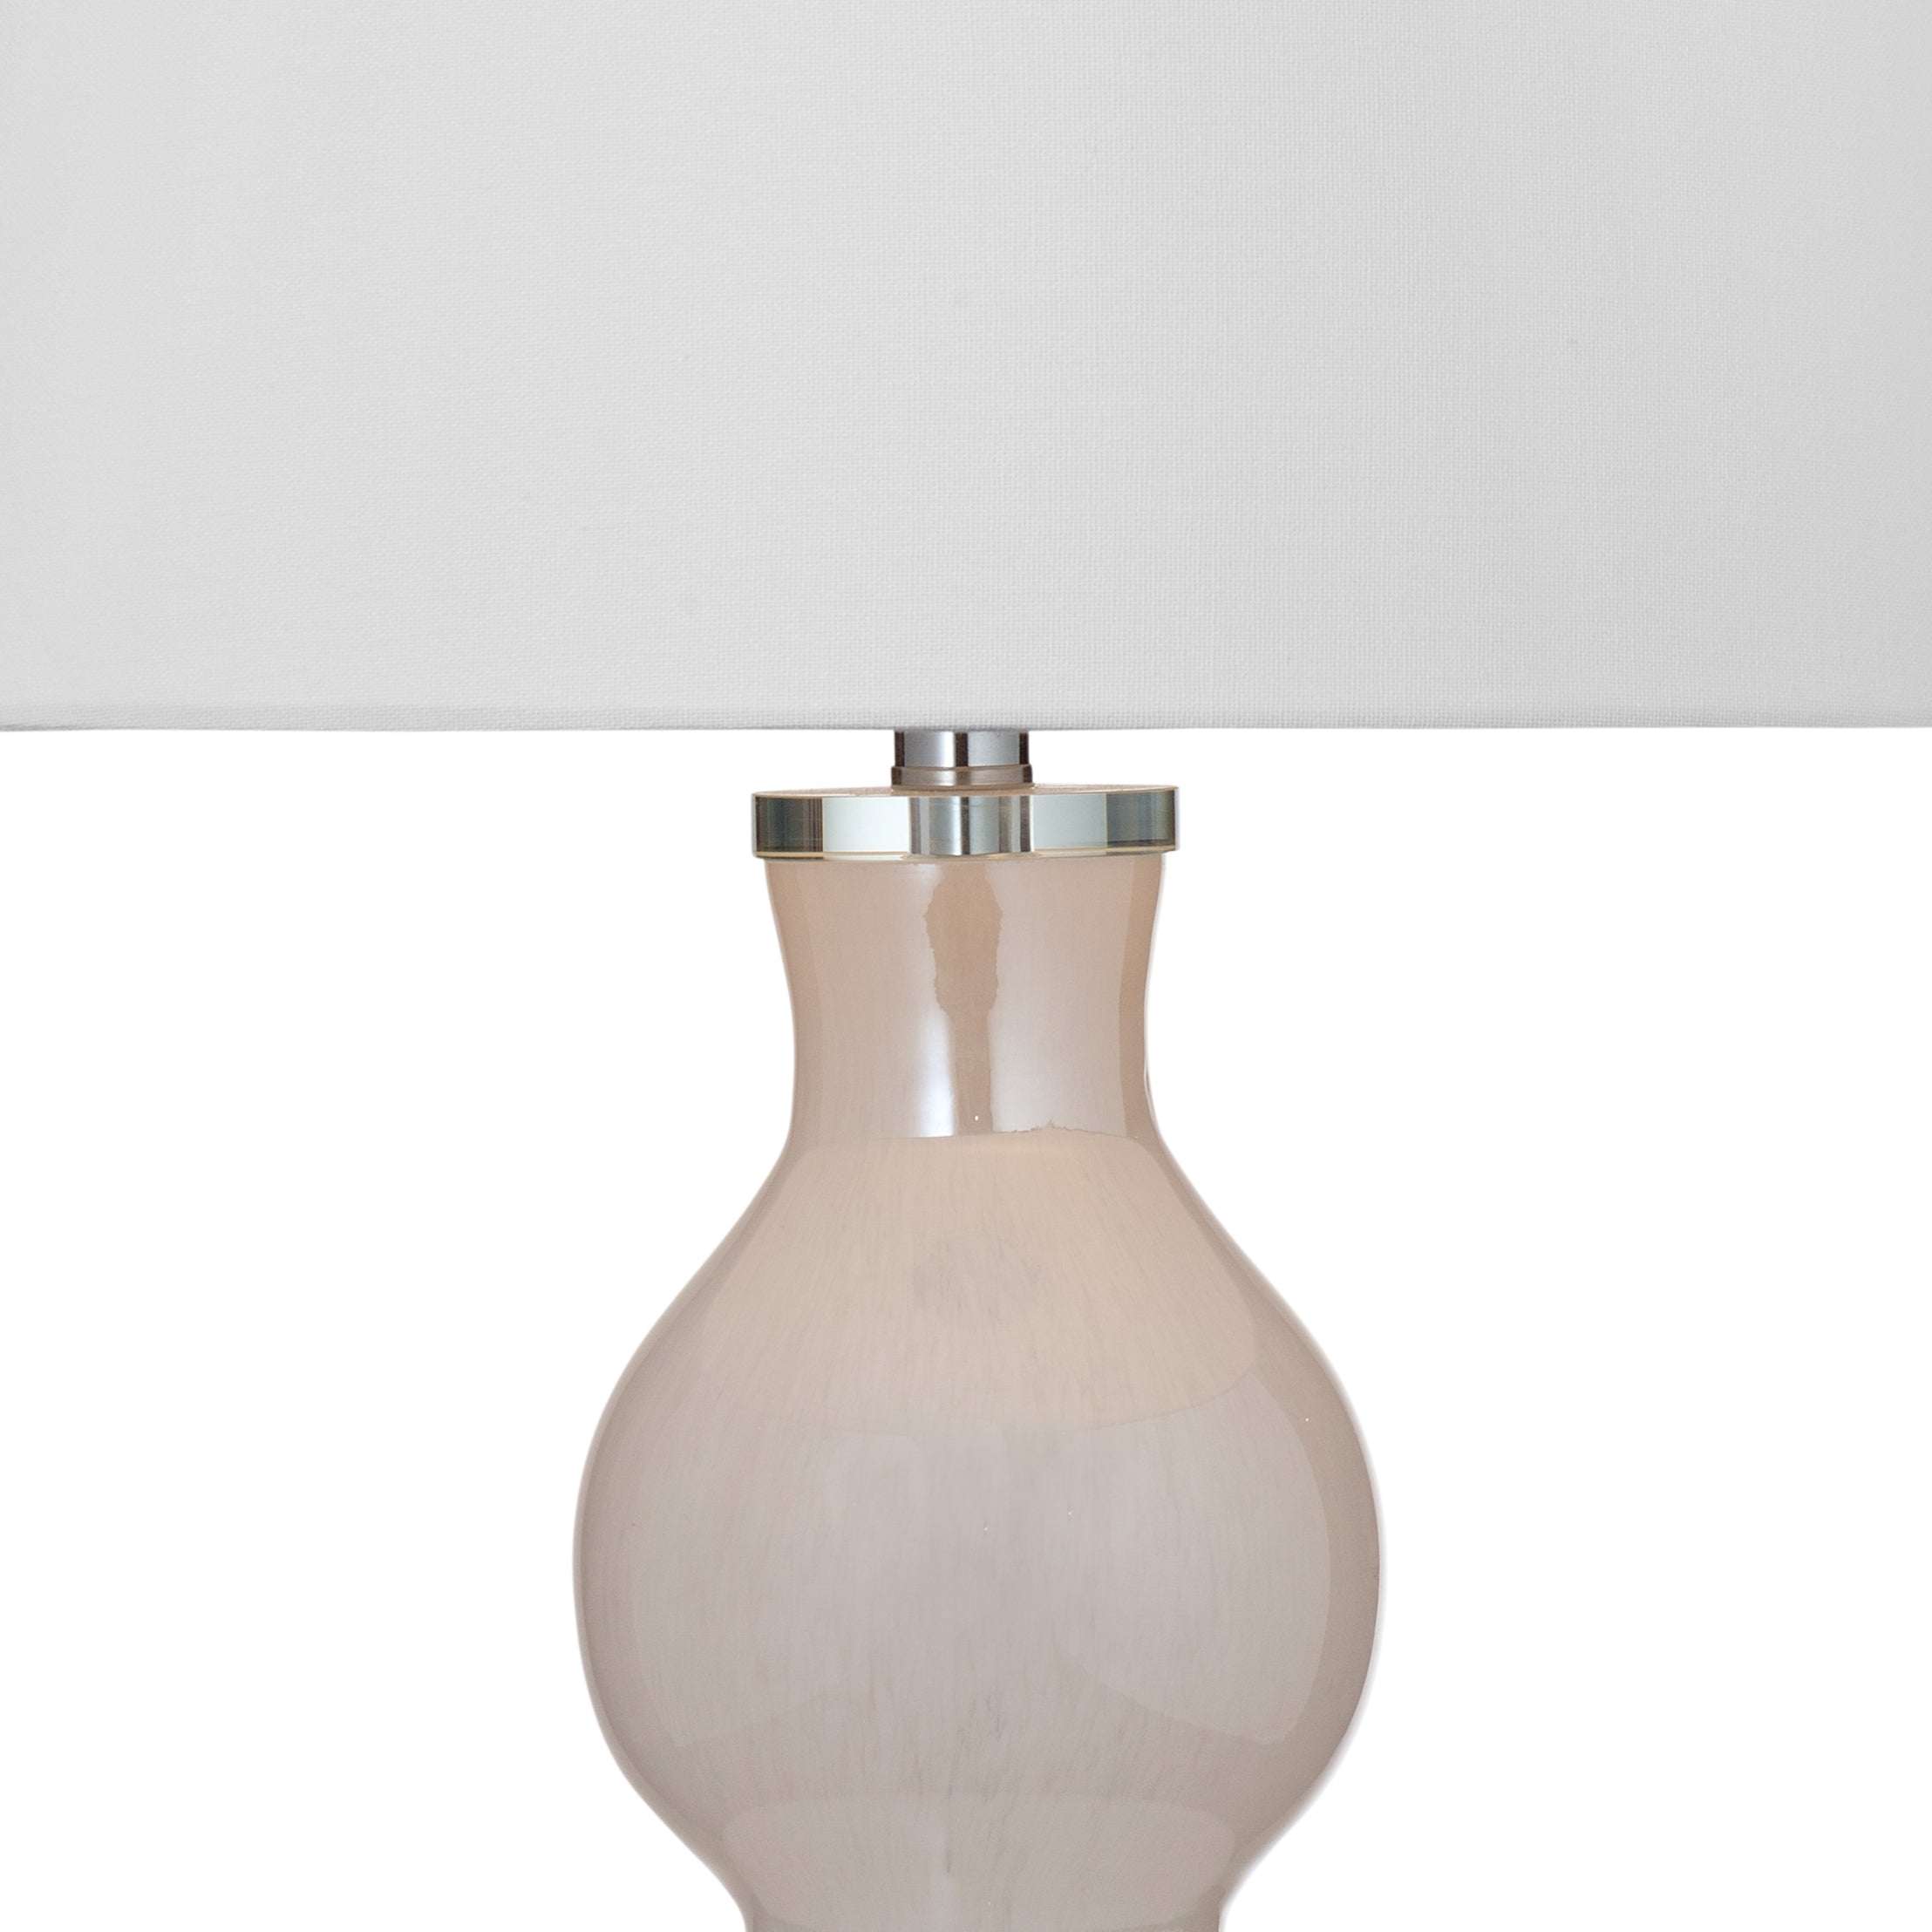 Thayer Table Lamp